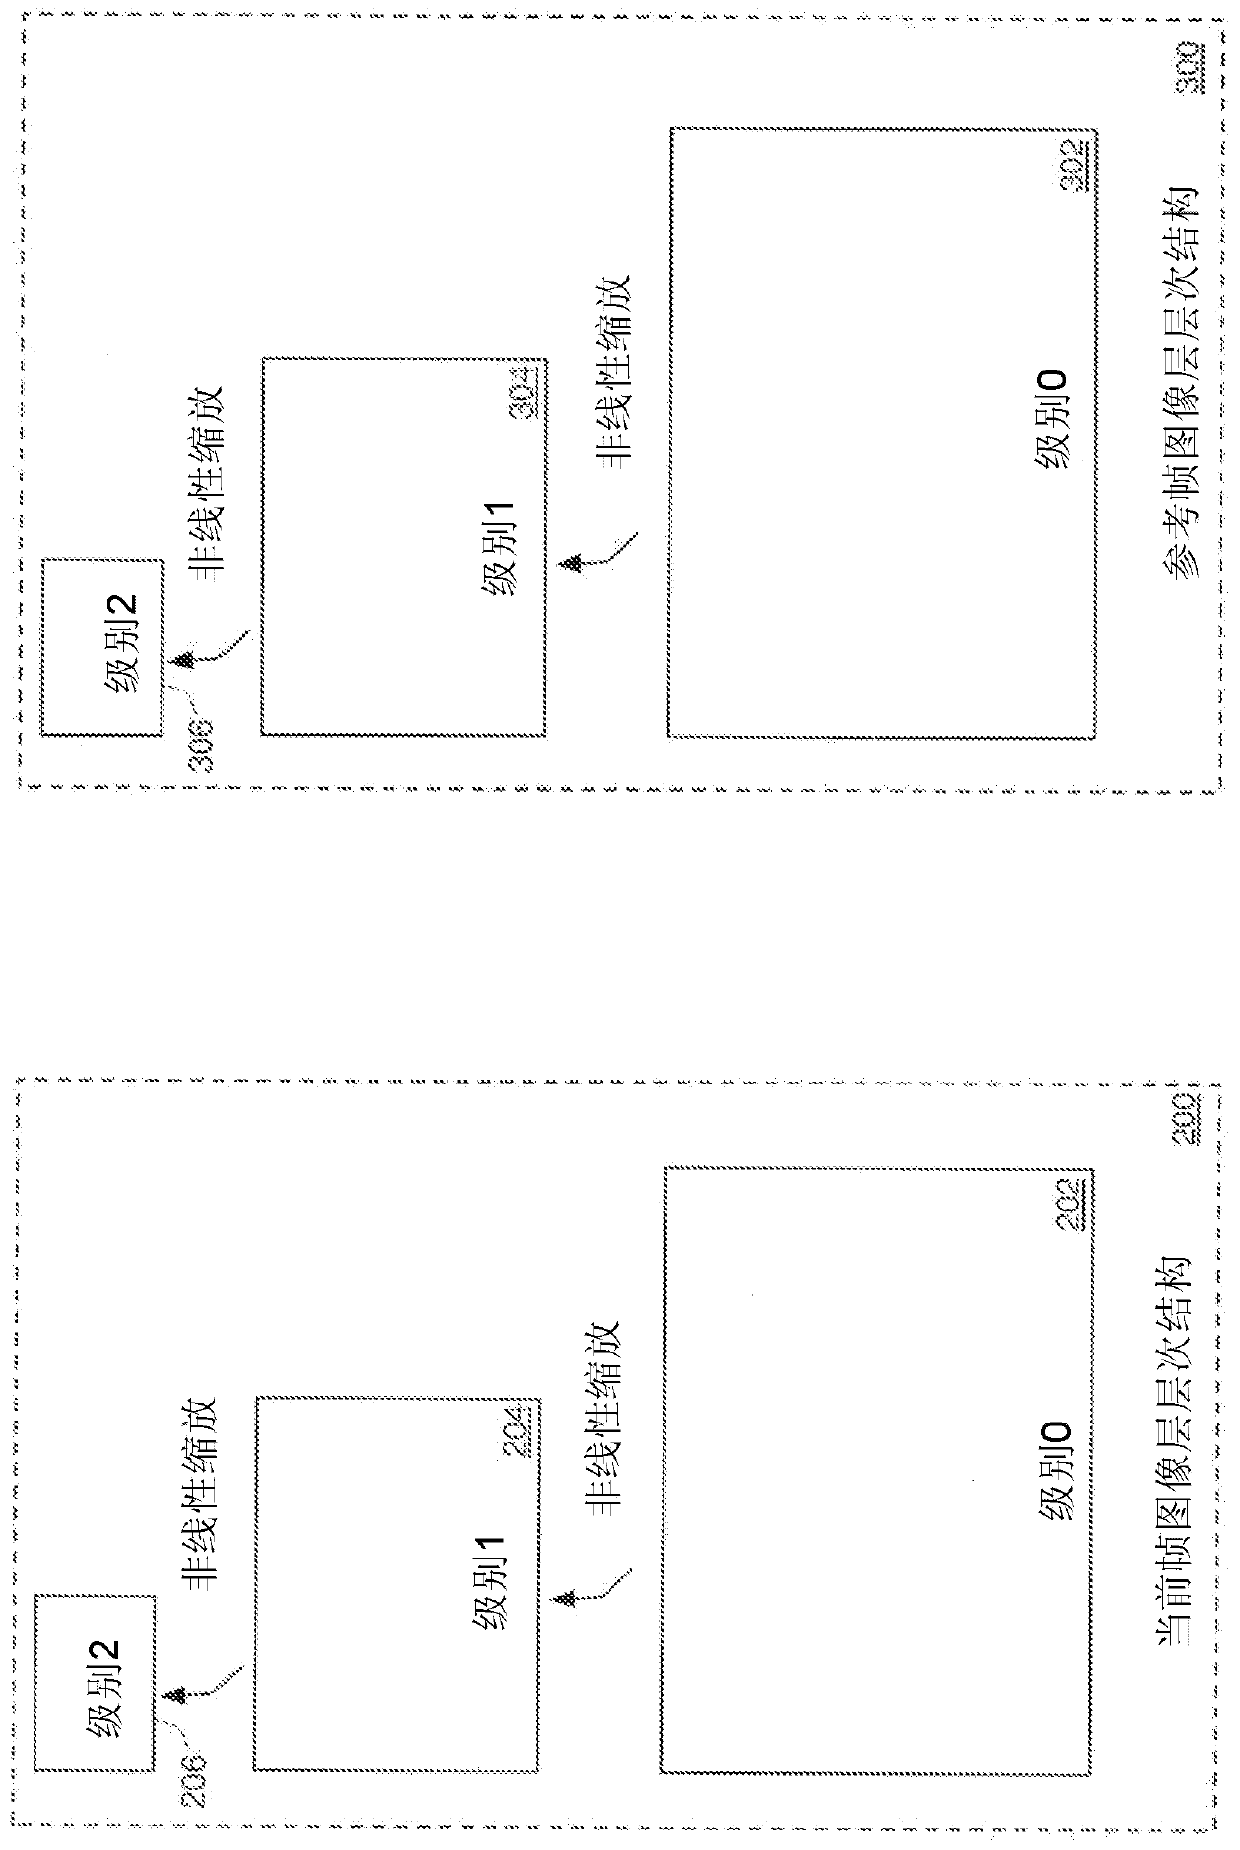 Hierarchical Motion Estimation Using Nonlinear Scaling and Adaptive Source Block Size